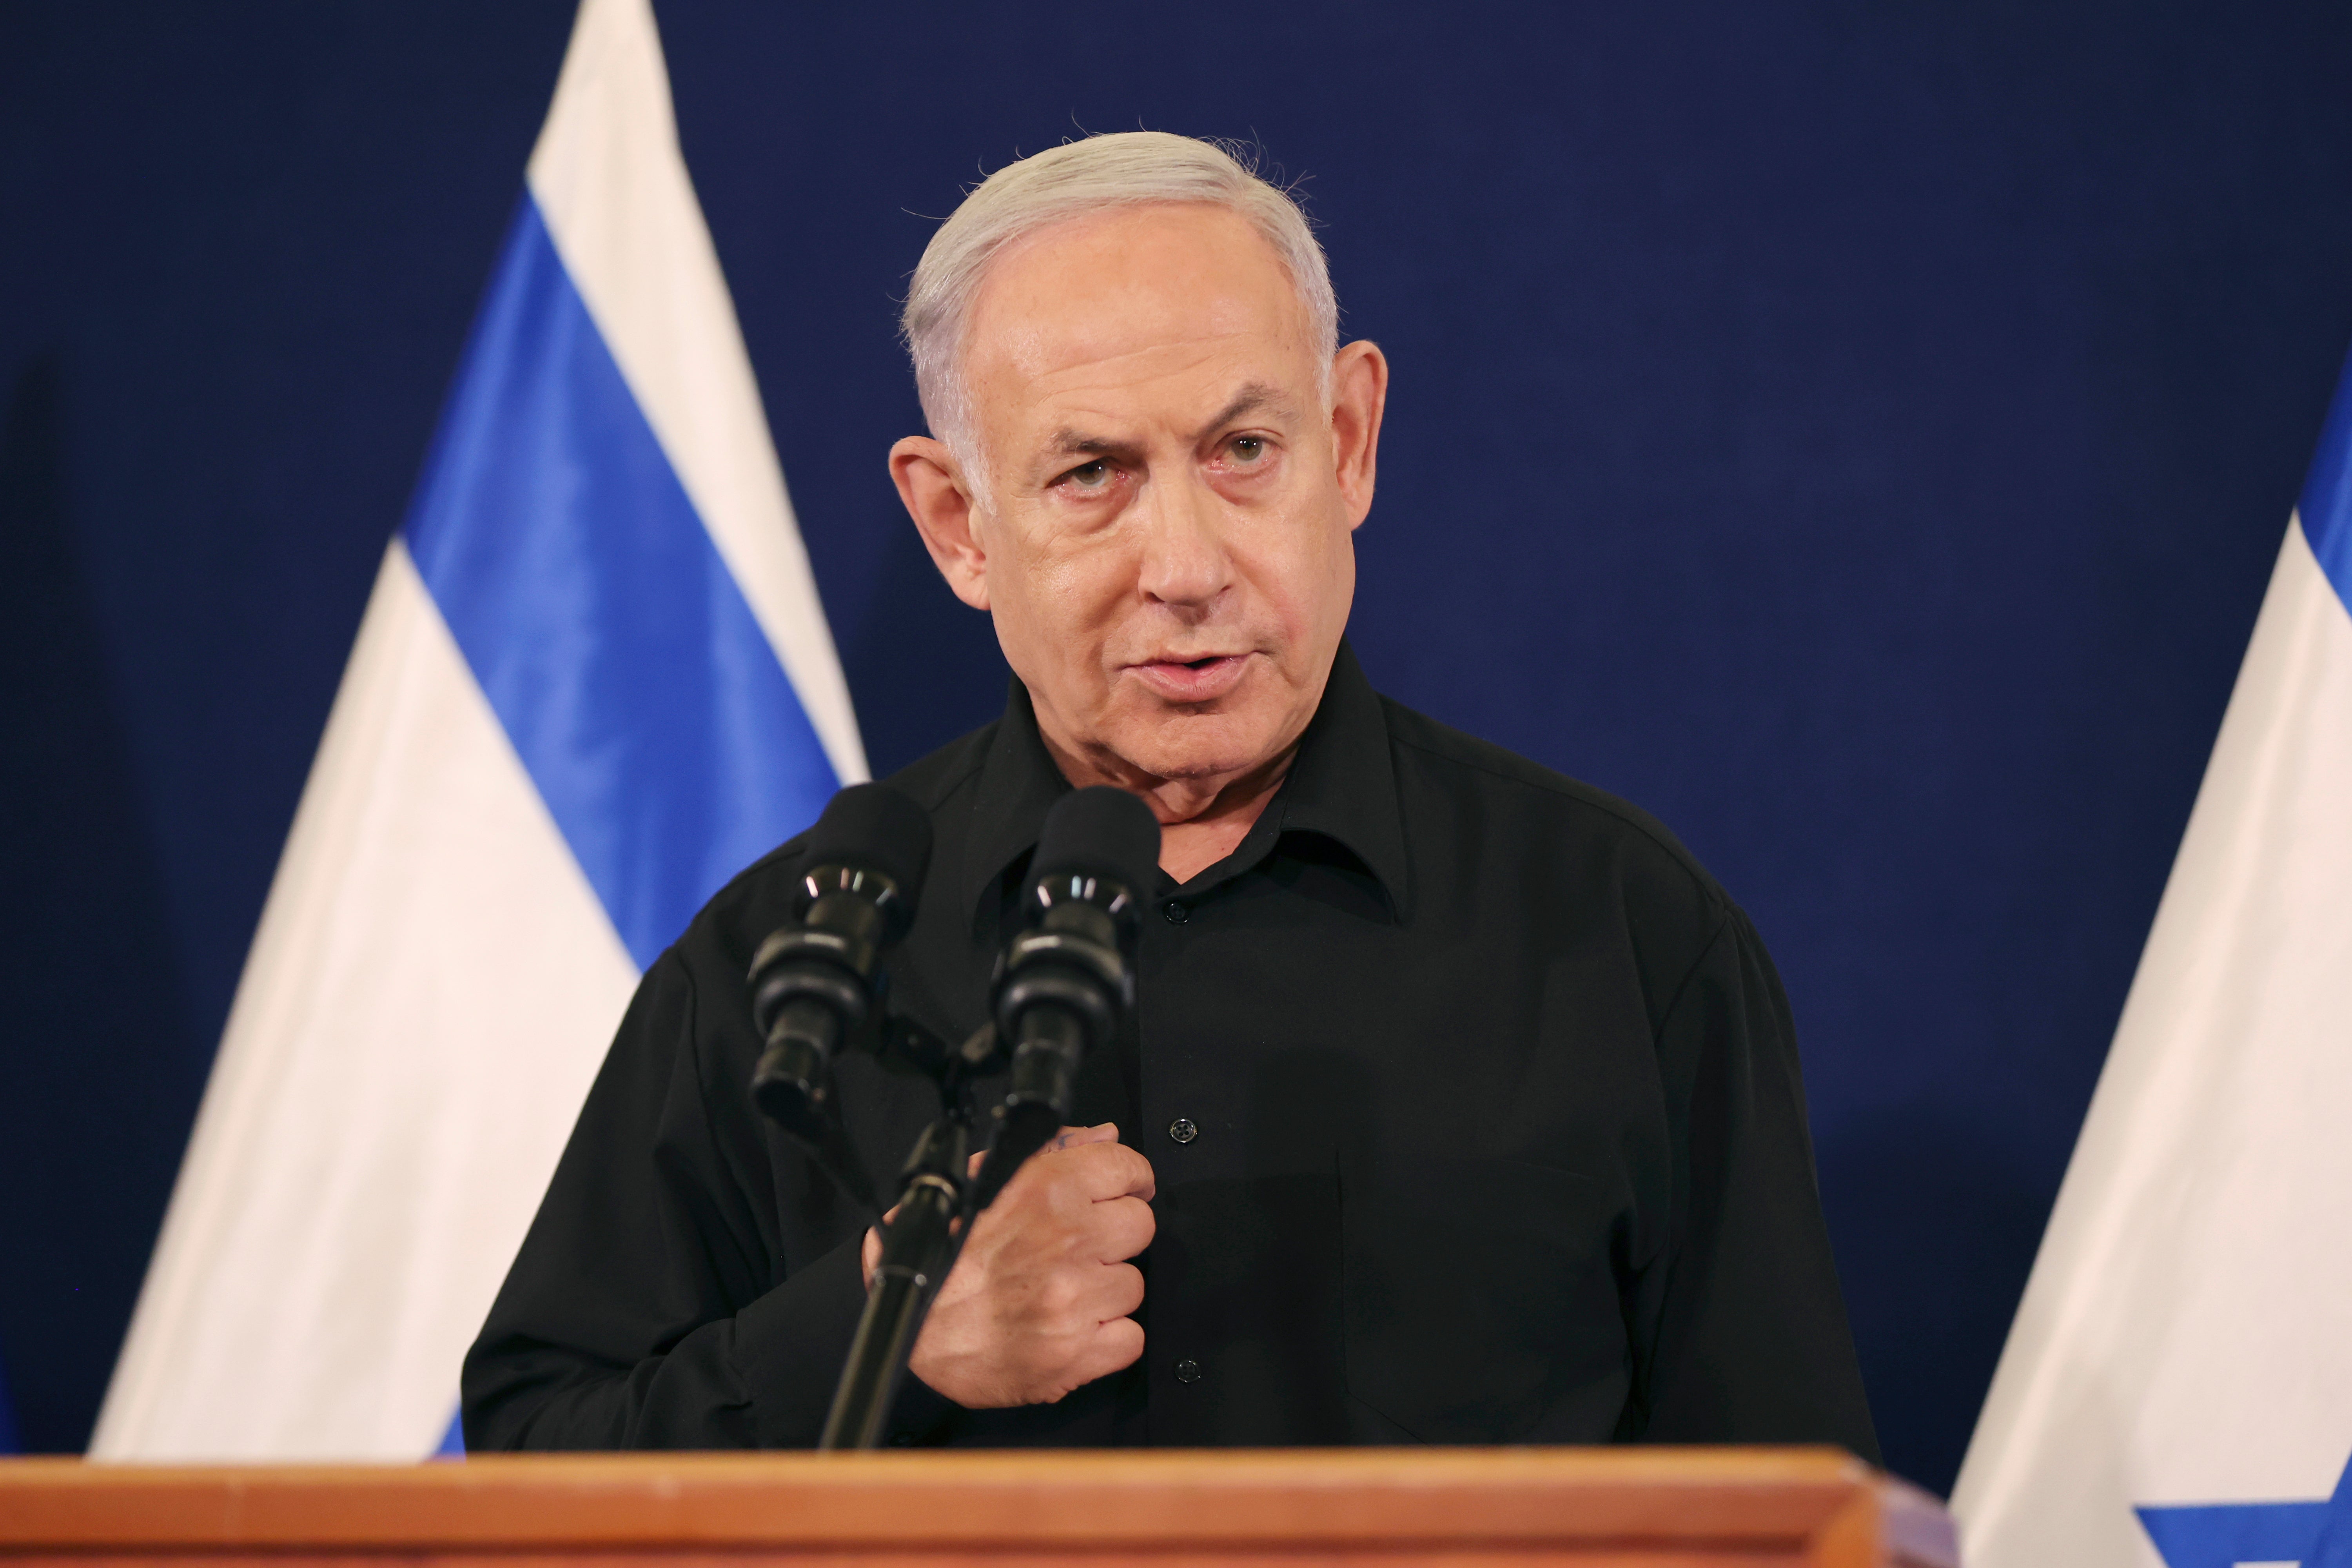 Israeli PM Benjamin Netanyahu is under considerable domestic pressure to rescue hostages held by Hamas in Gaza